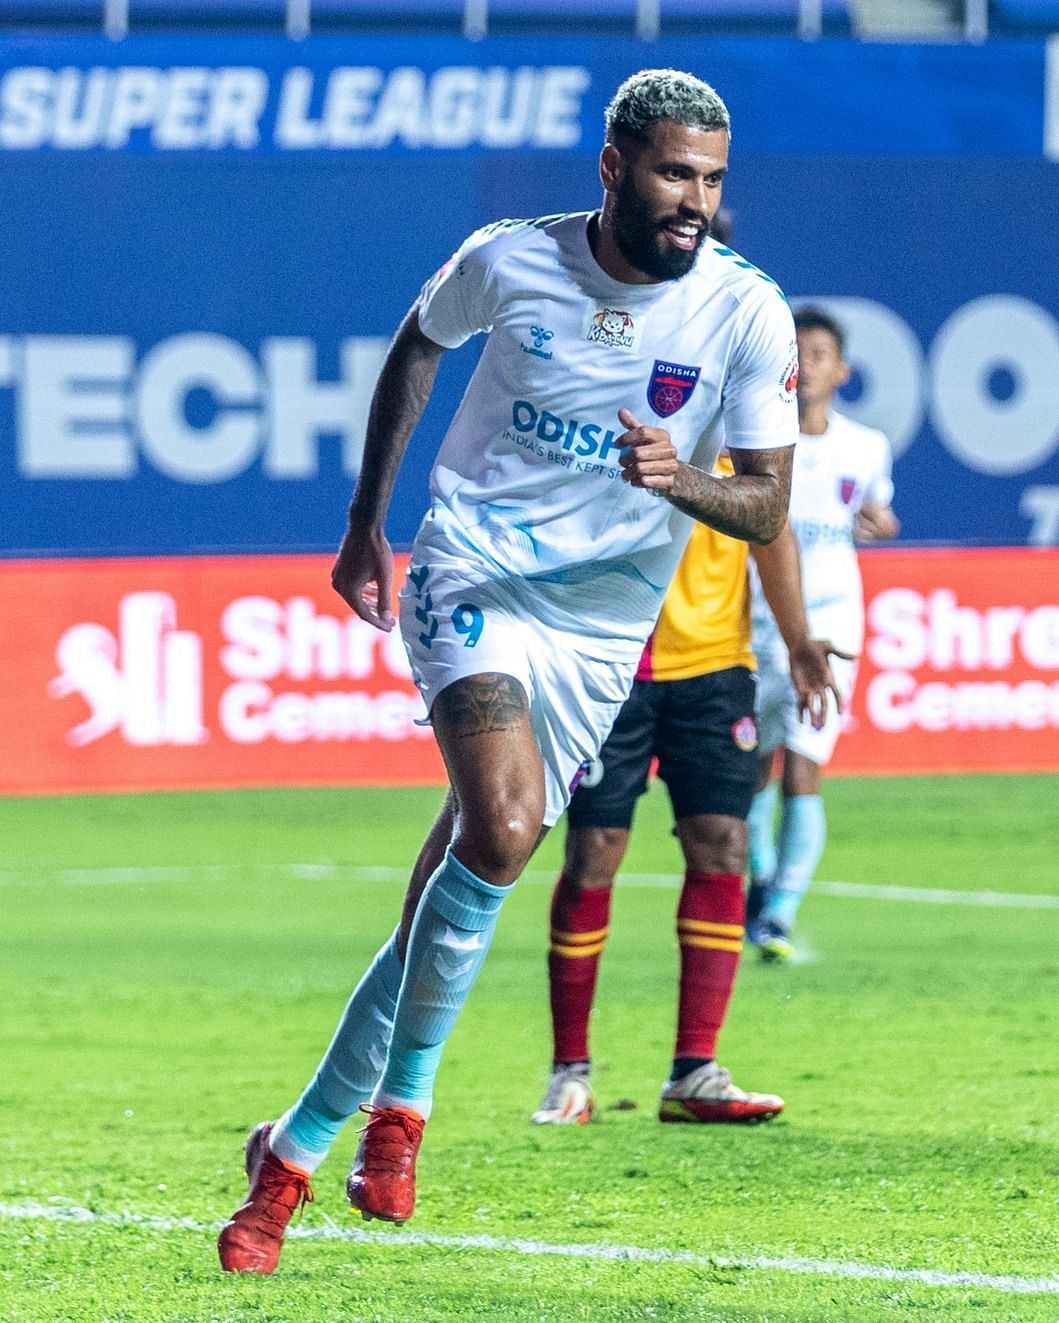 Jonathas had a goal and an assist to his name today (Image courtesy: ISL Social Media)